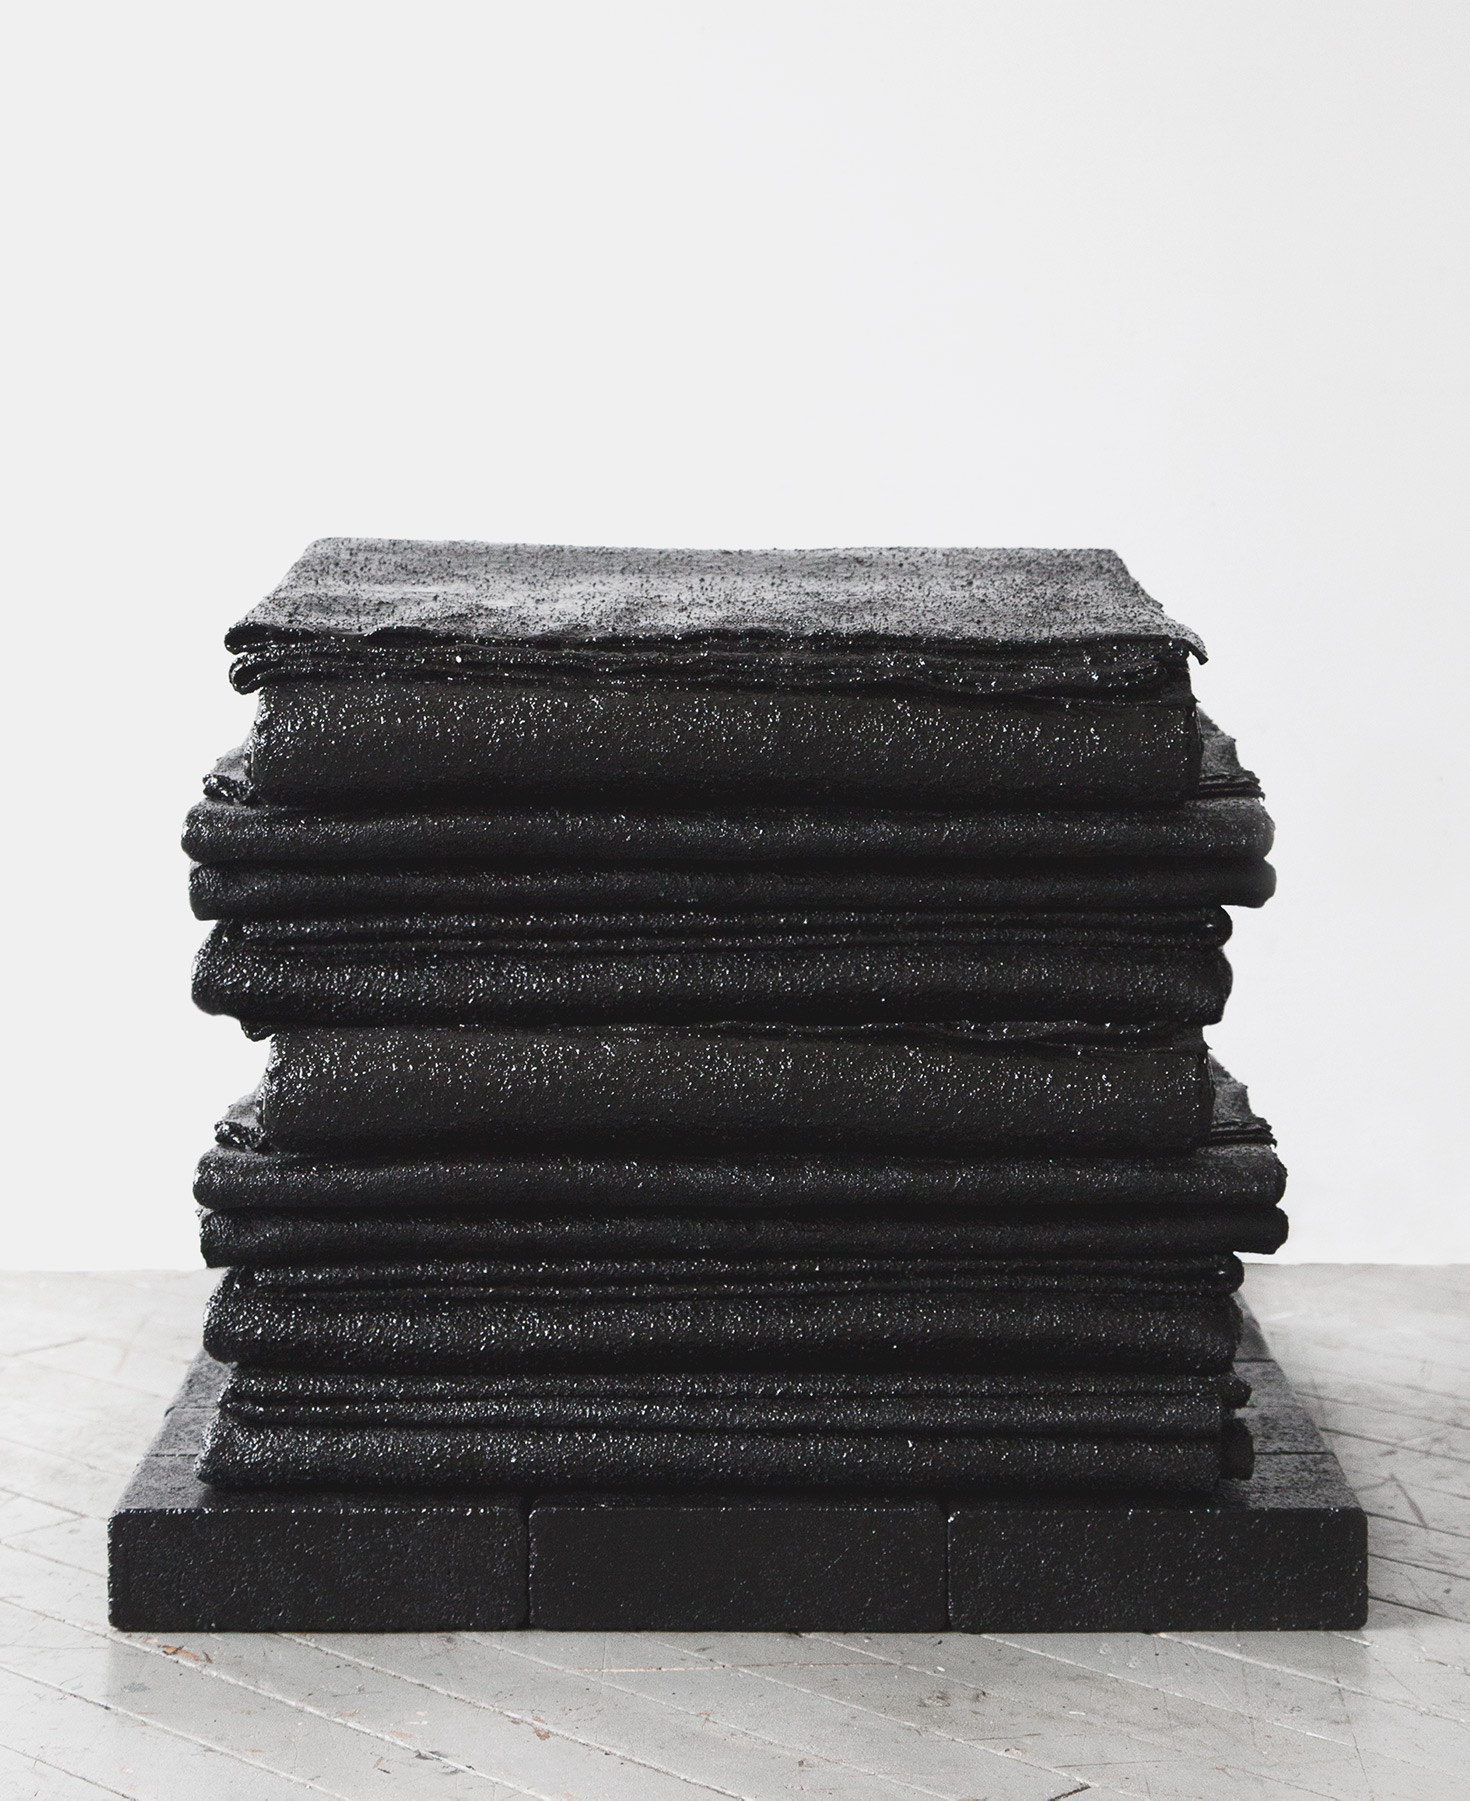 Stephanie Powell
                                    'To keep you warm at night,' 2013
                                    25 x 23 x 19 Inches
                                    lacquer, wool, cement
                                    